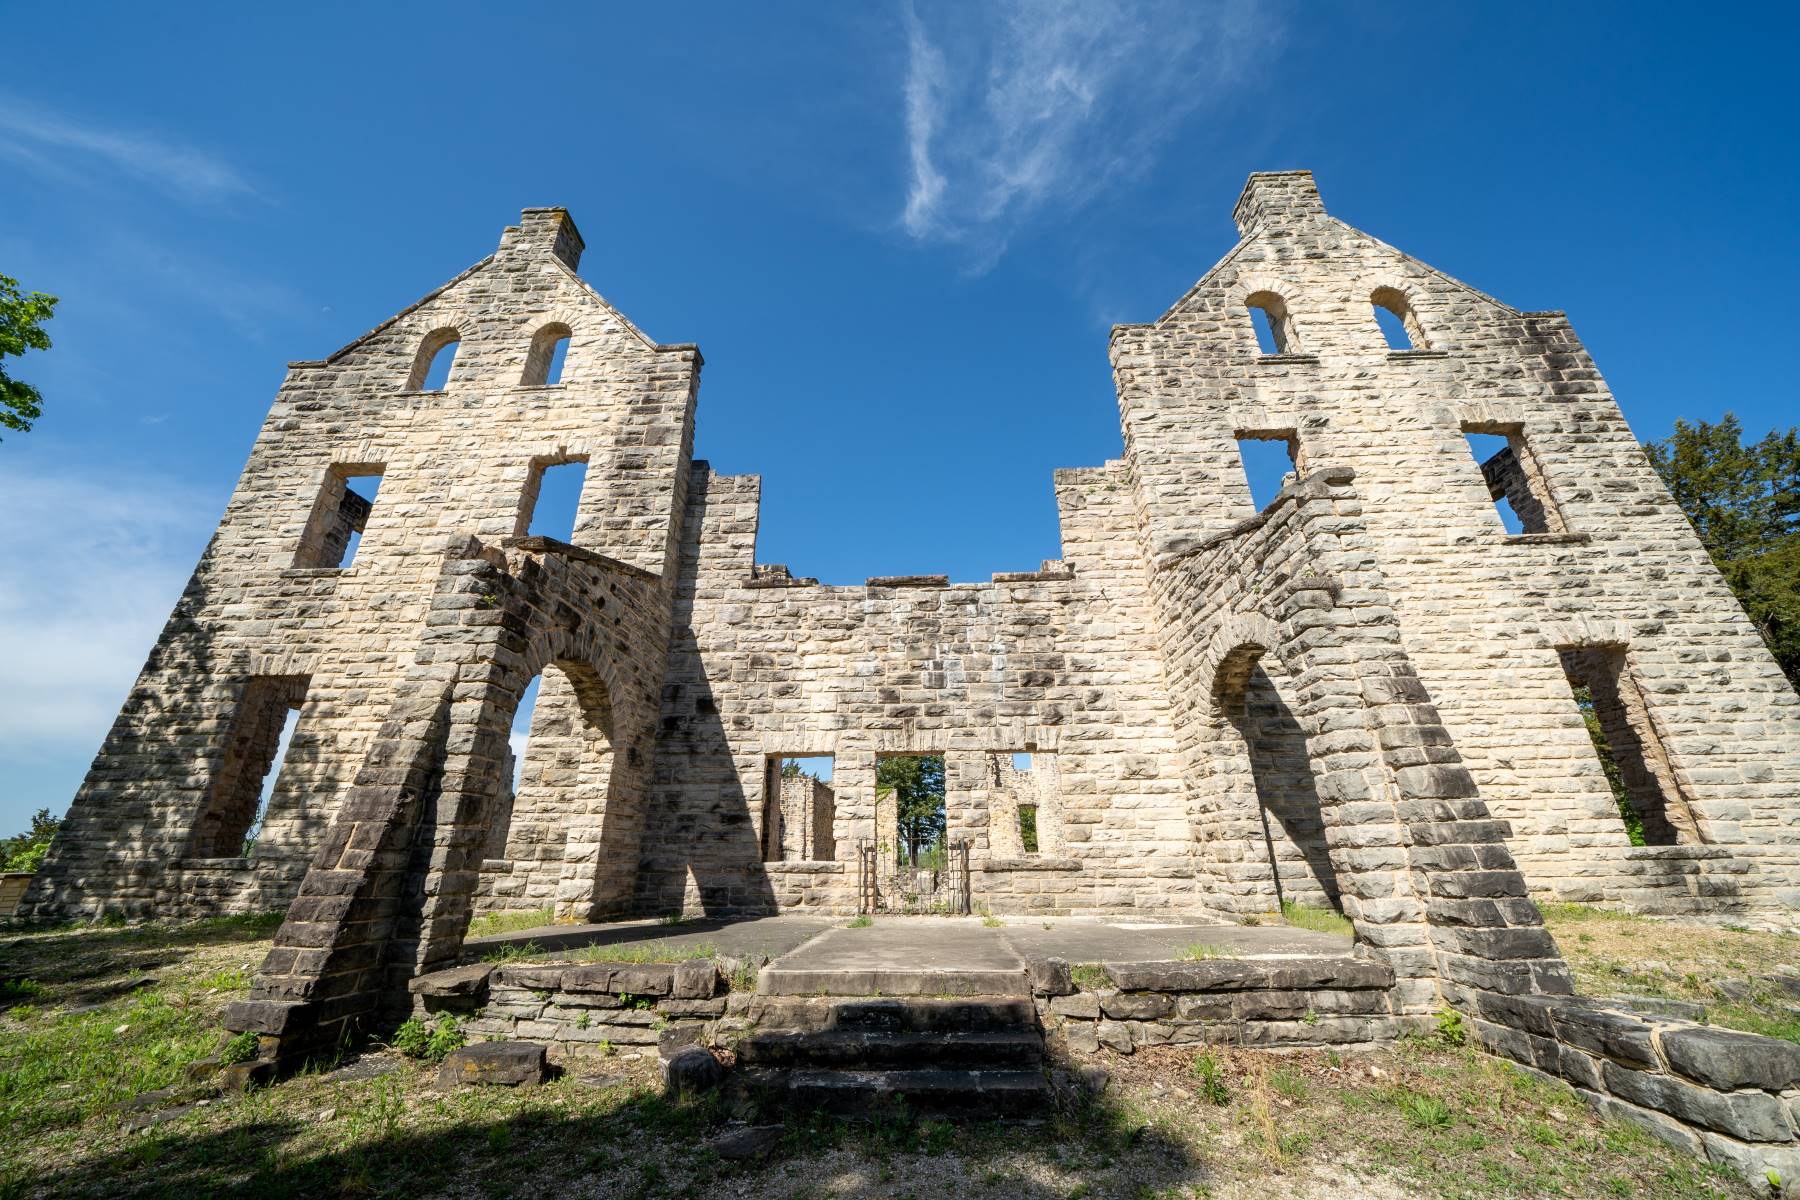 It is not an every day occurrence to see European inspired castle ruins in a Missouri state park.